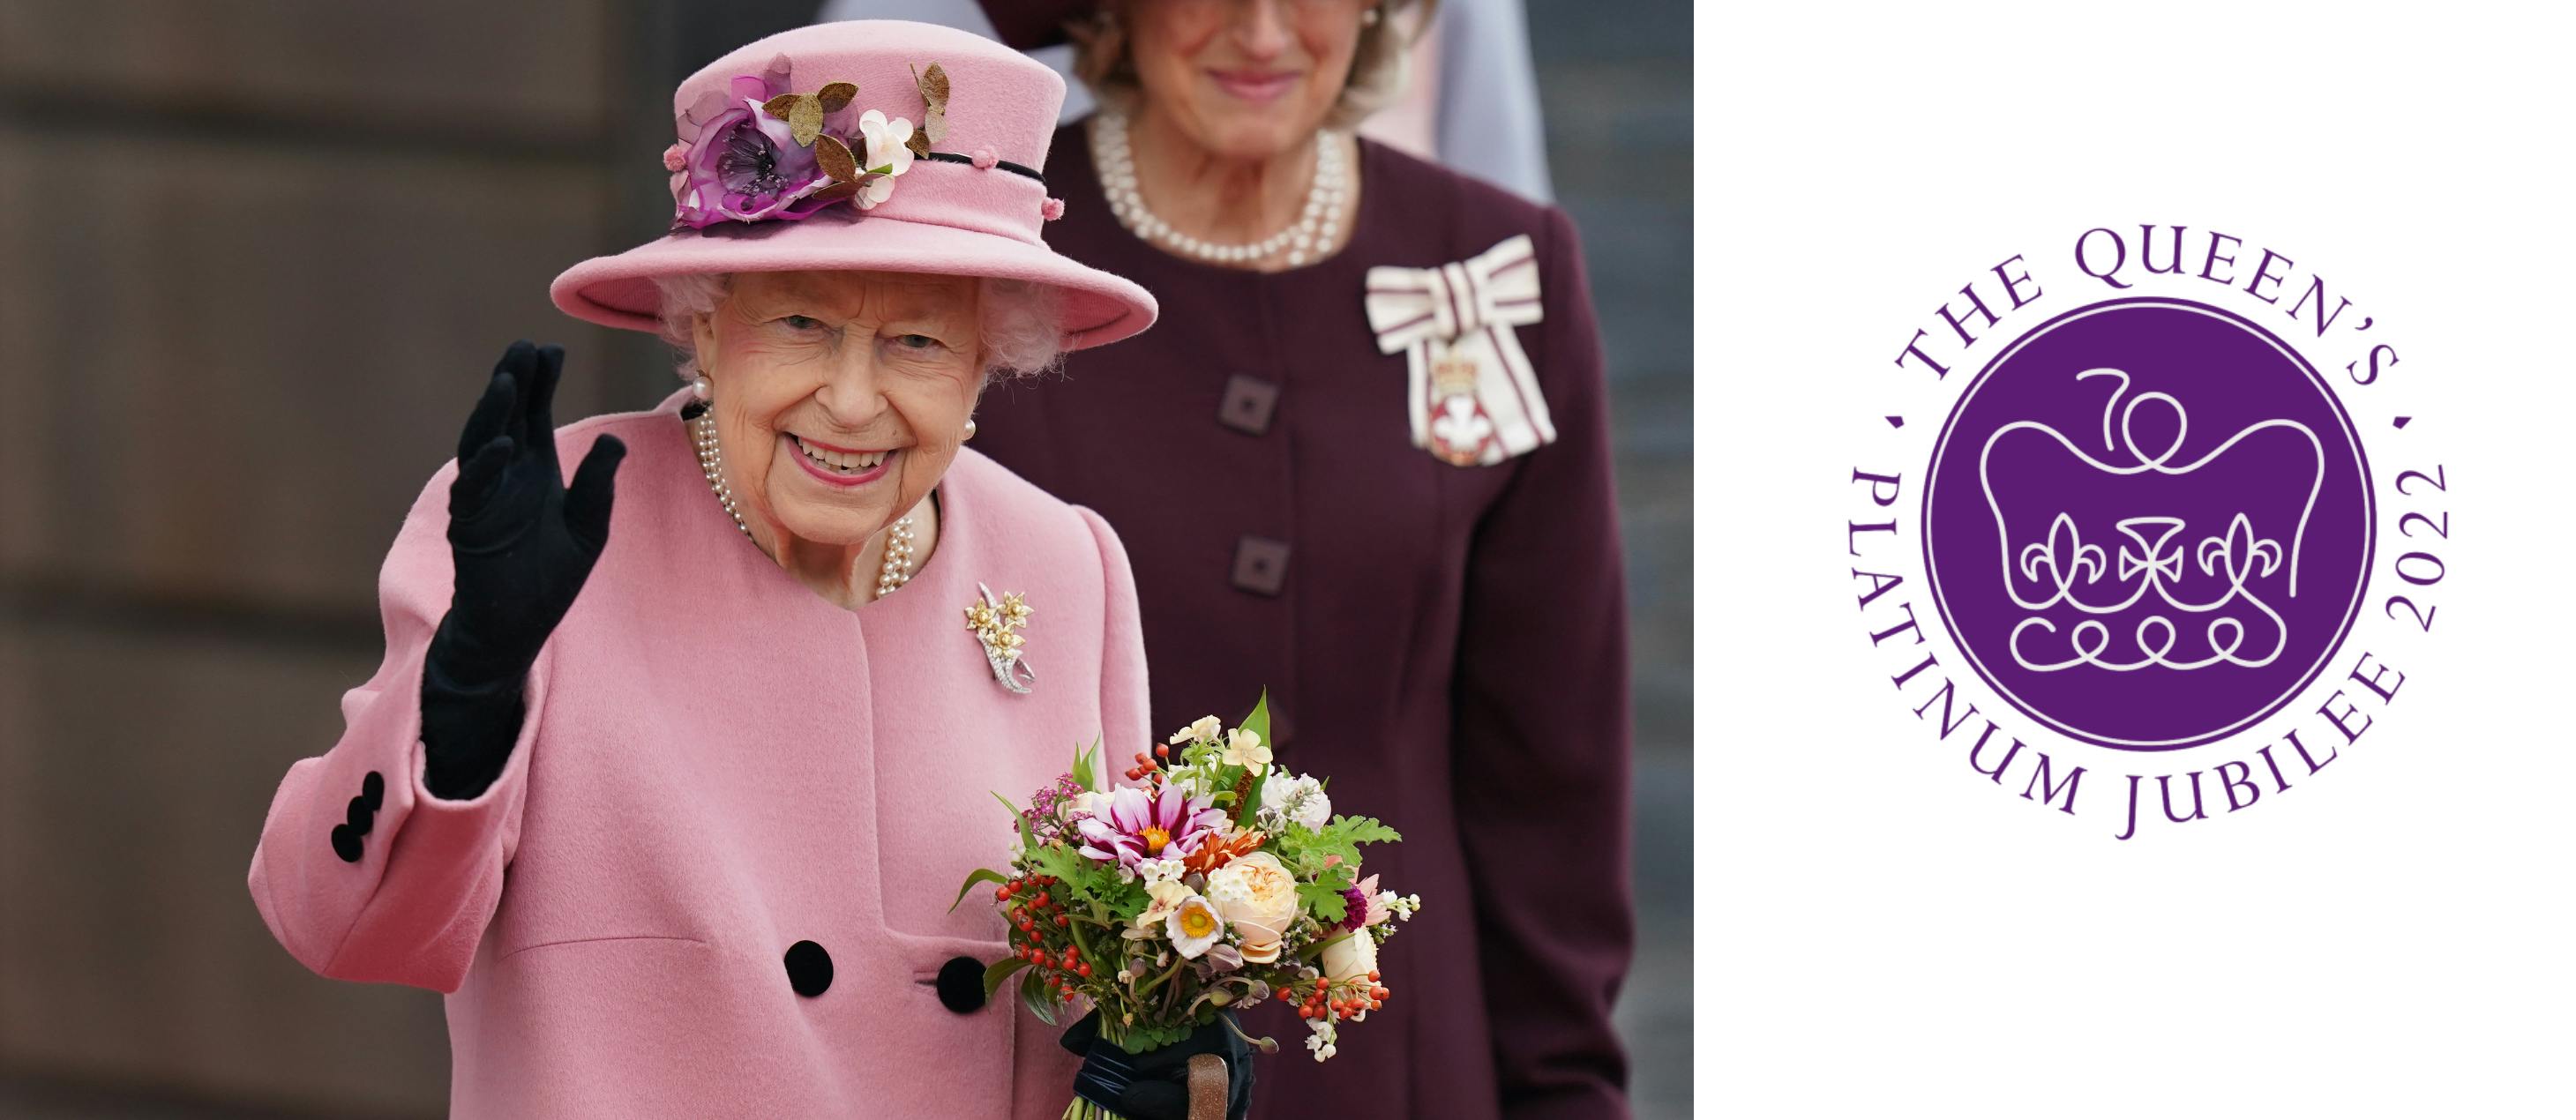 Her Majesty the Queen in a pink coat and hat with a bouquet of flowers and the Platinum Jubilee logo